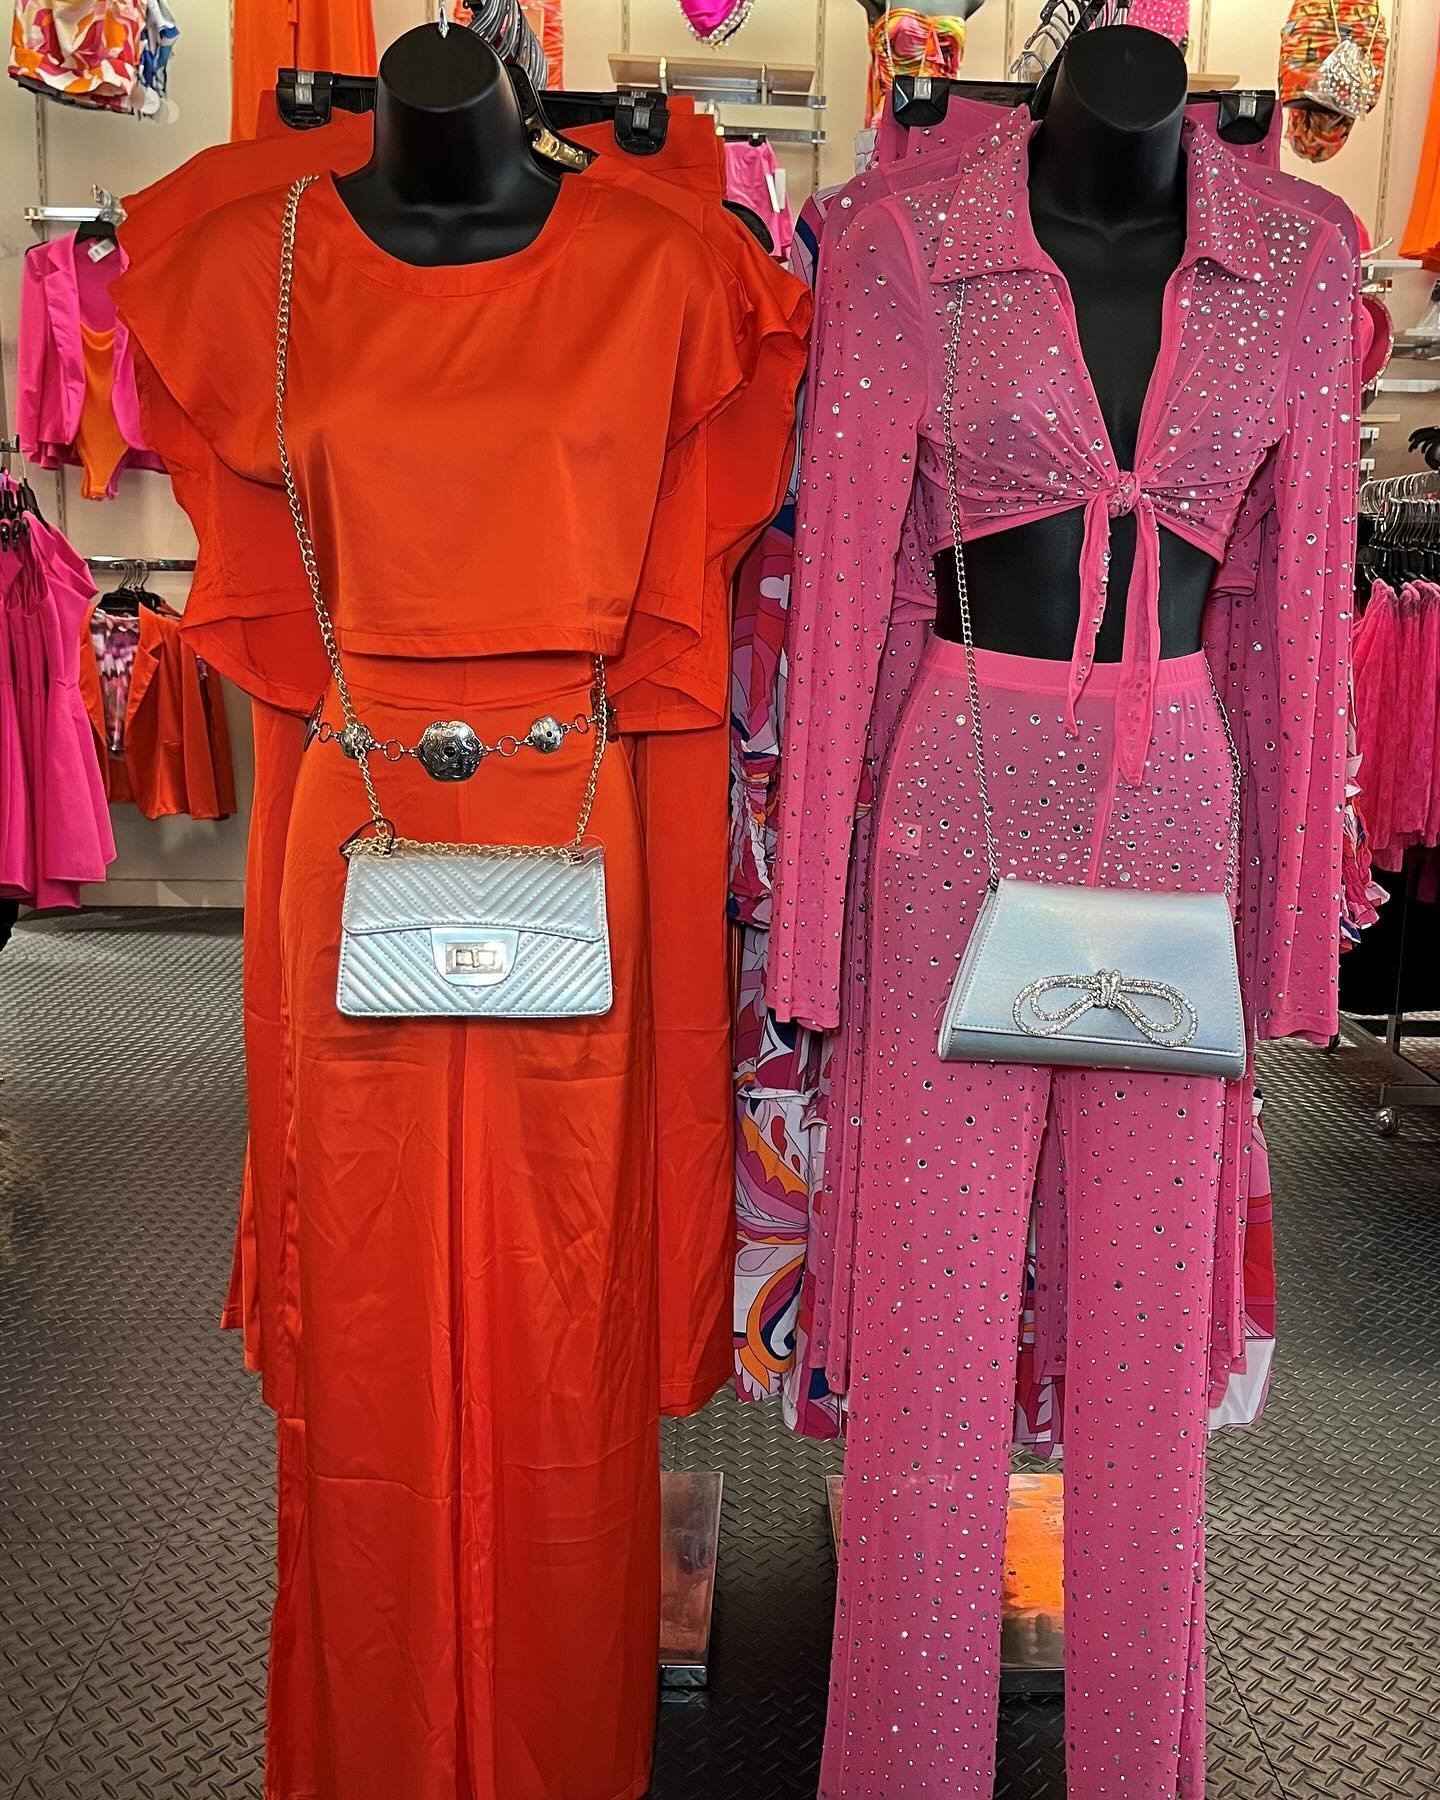 Stock up on your spring &amp; summer fits with our pink &amp; orange outfits 🌅🩷 #madragstores